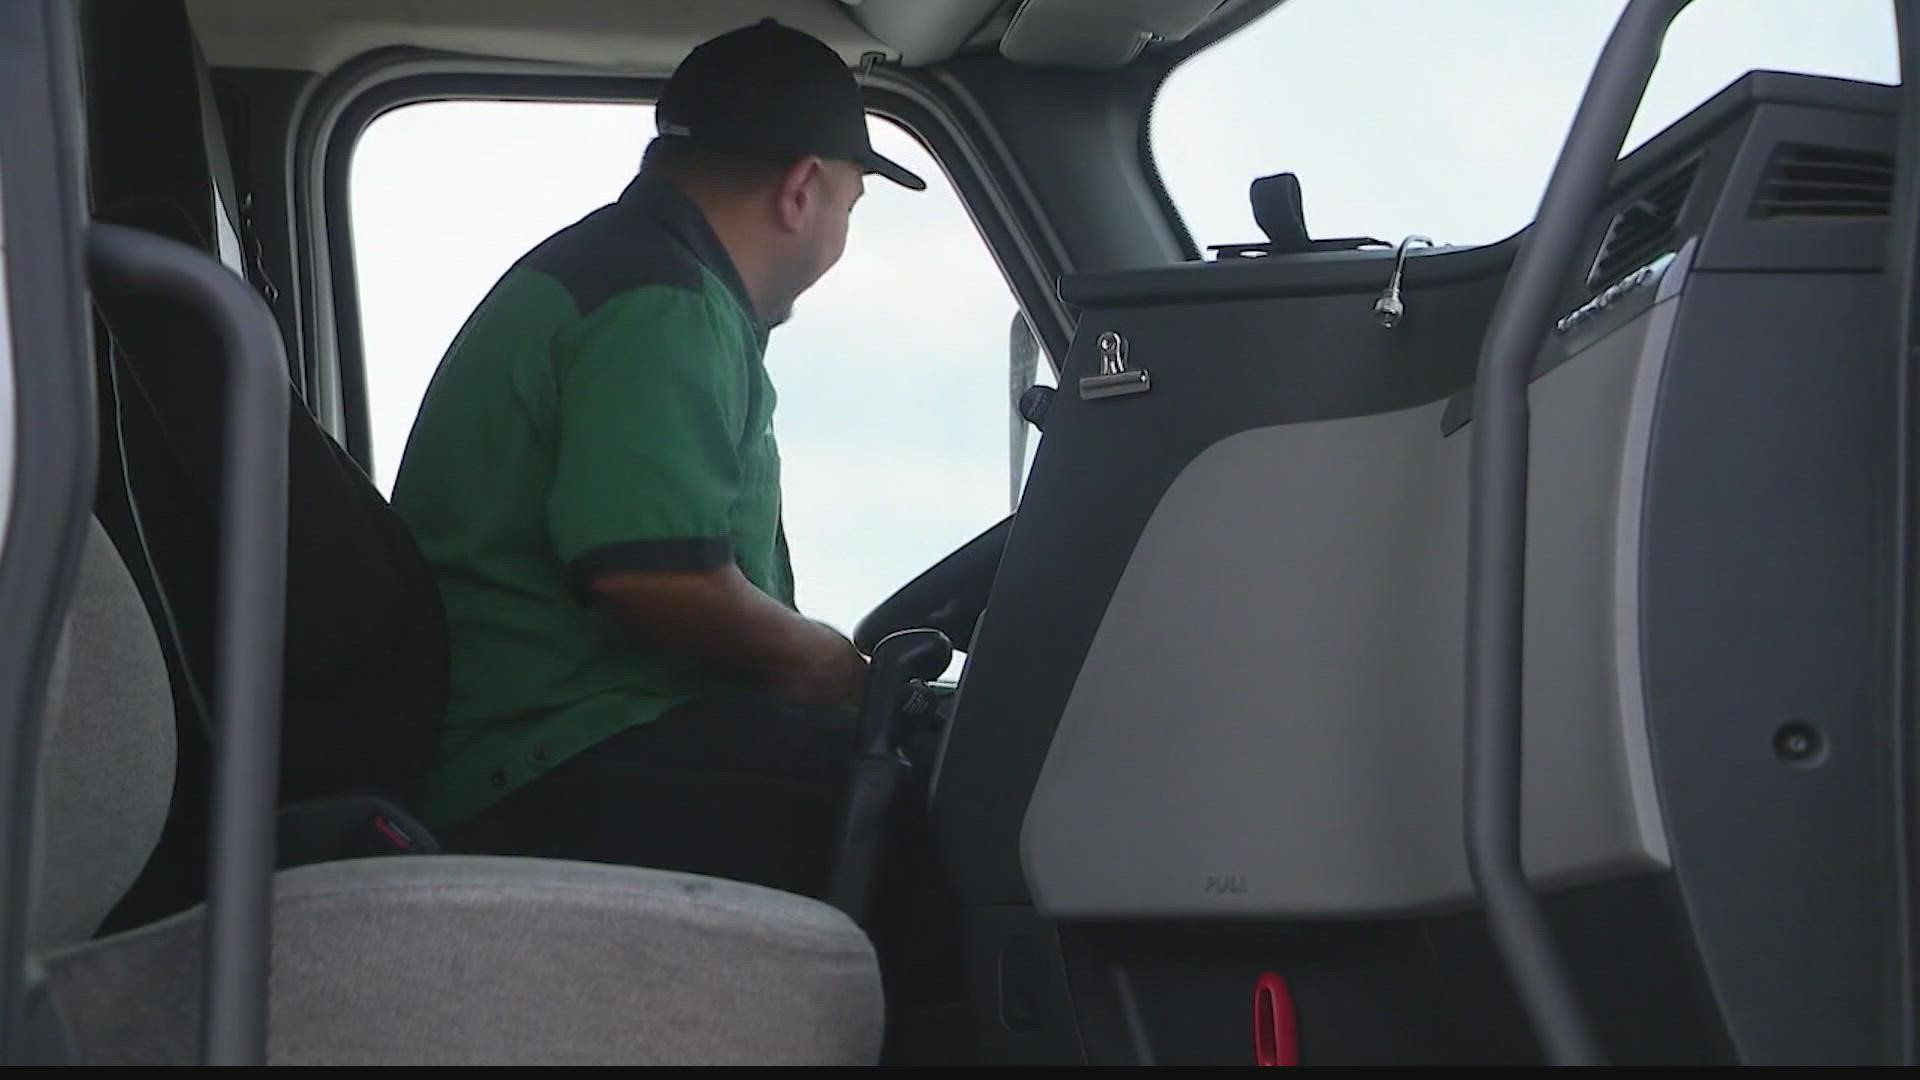 There's a shortage of truck drivers all across the country and Calhoun Community College is trying to fix that.